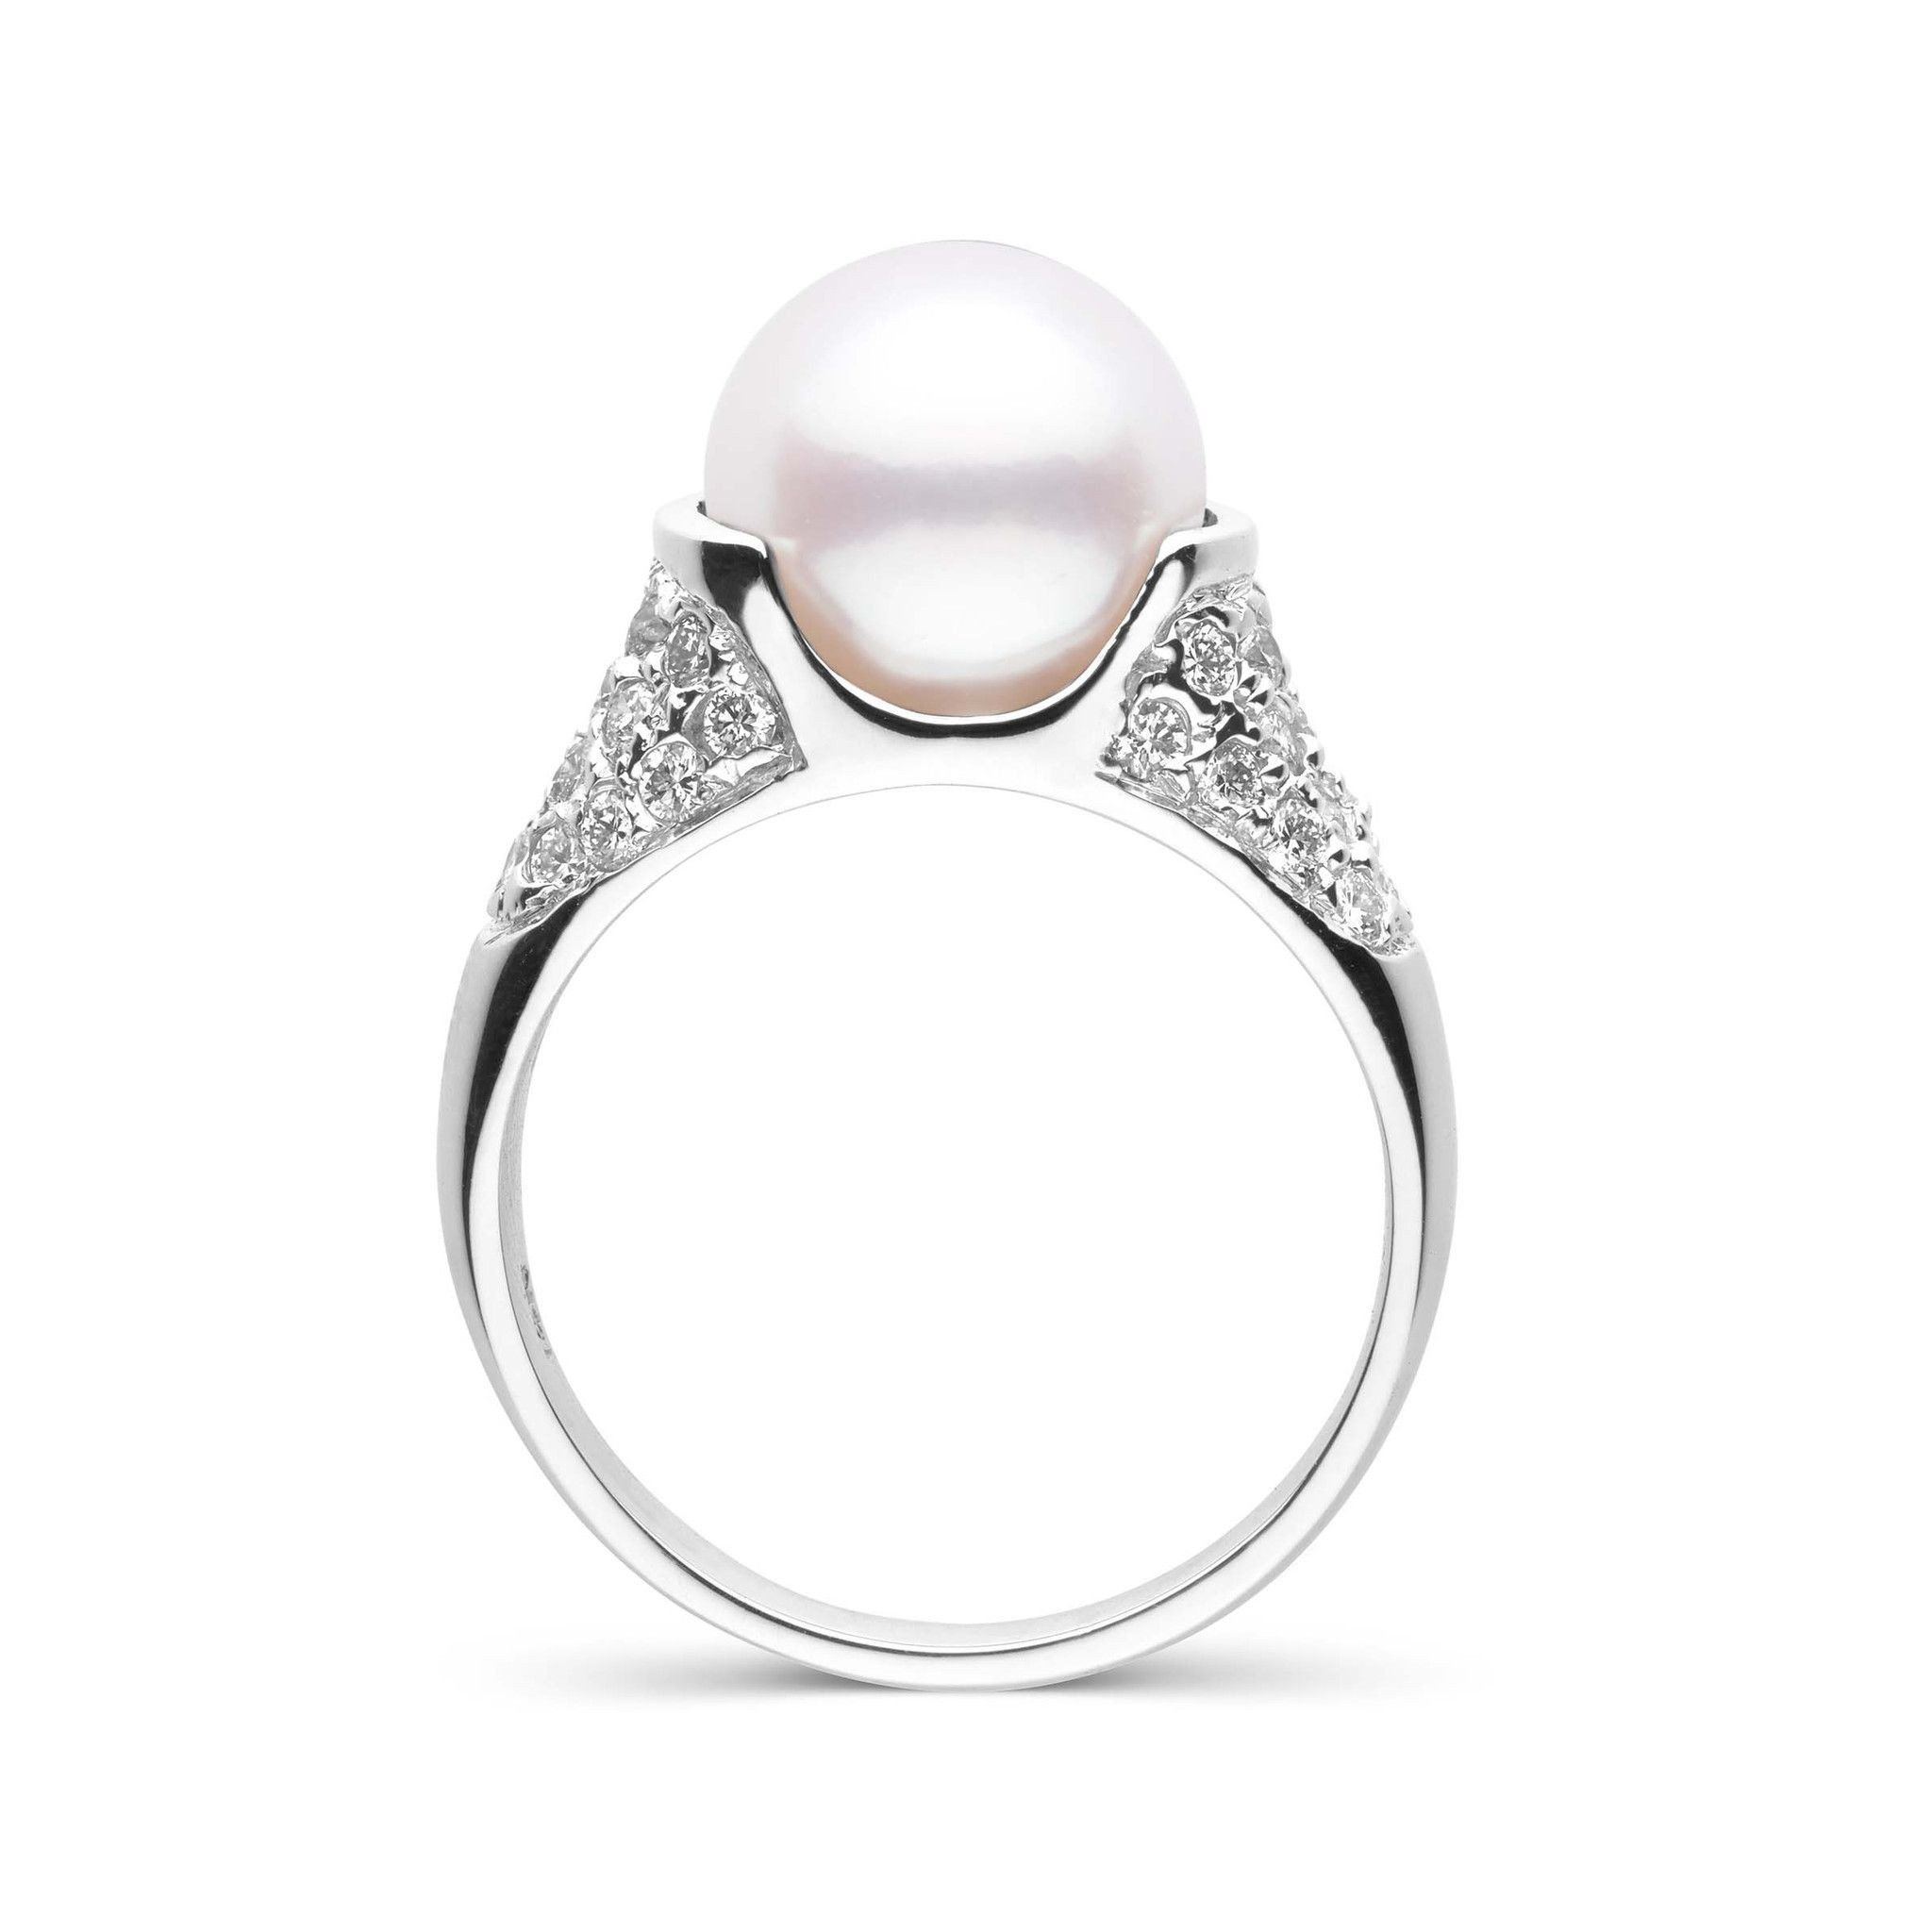 Frost Collection 9.0-10.0 mm White South Sea Pearl and Diamond Ring